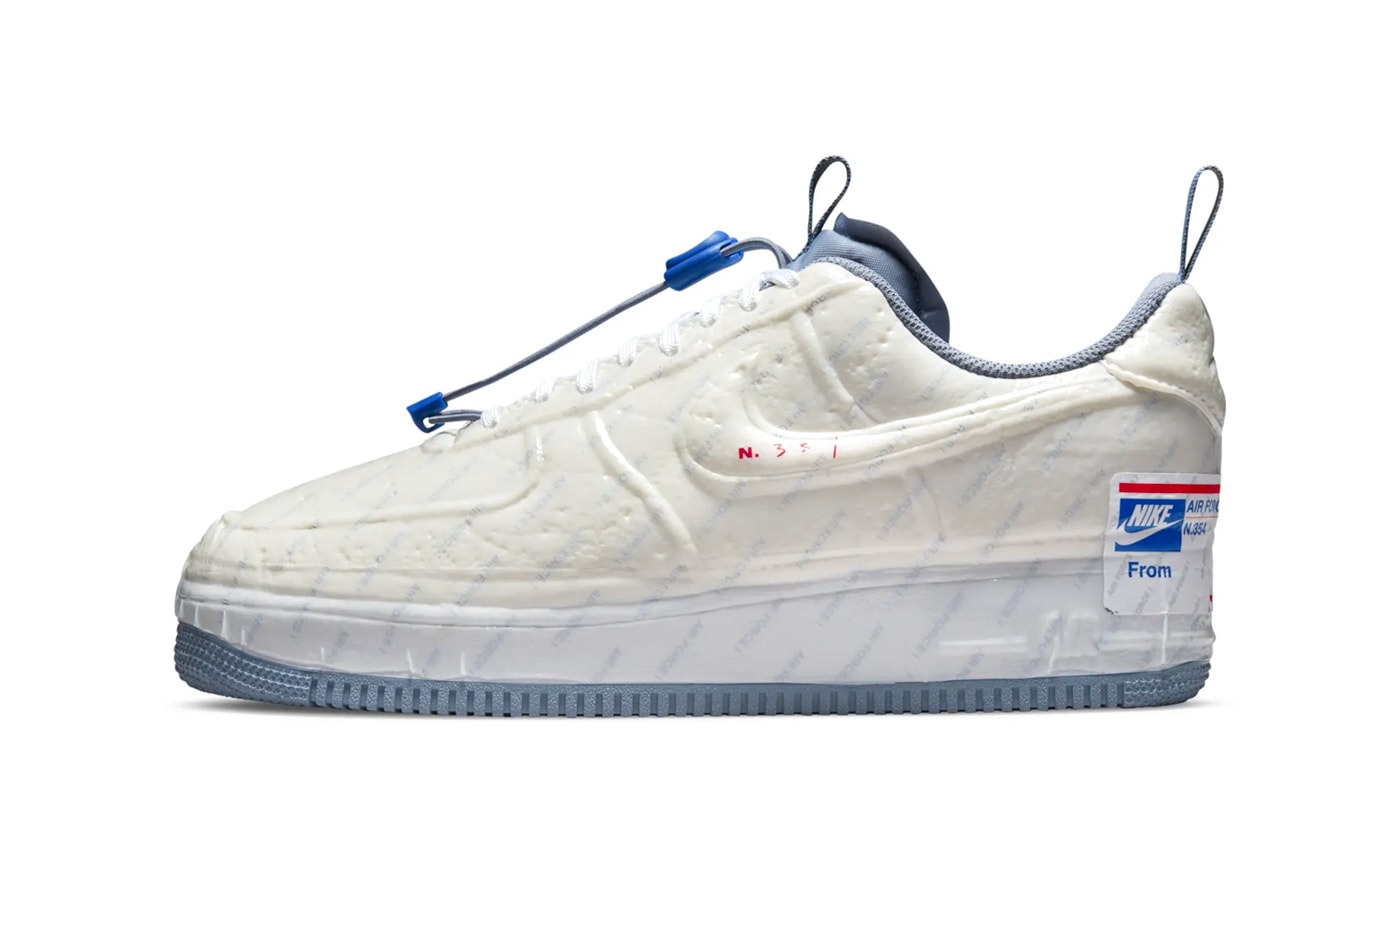 USPS x Air Force 1 Experimental "Postal Ghost" Release Date | Hypebeast